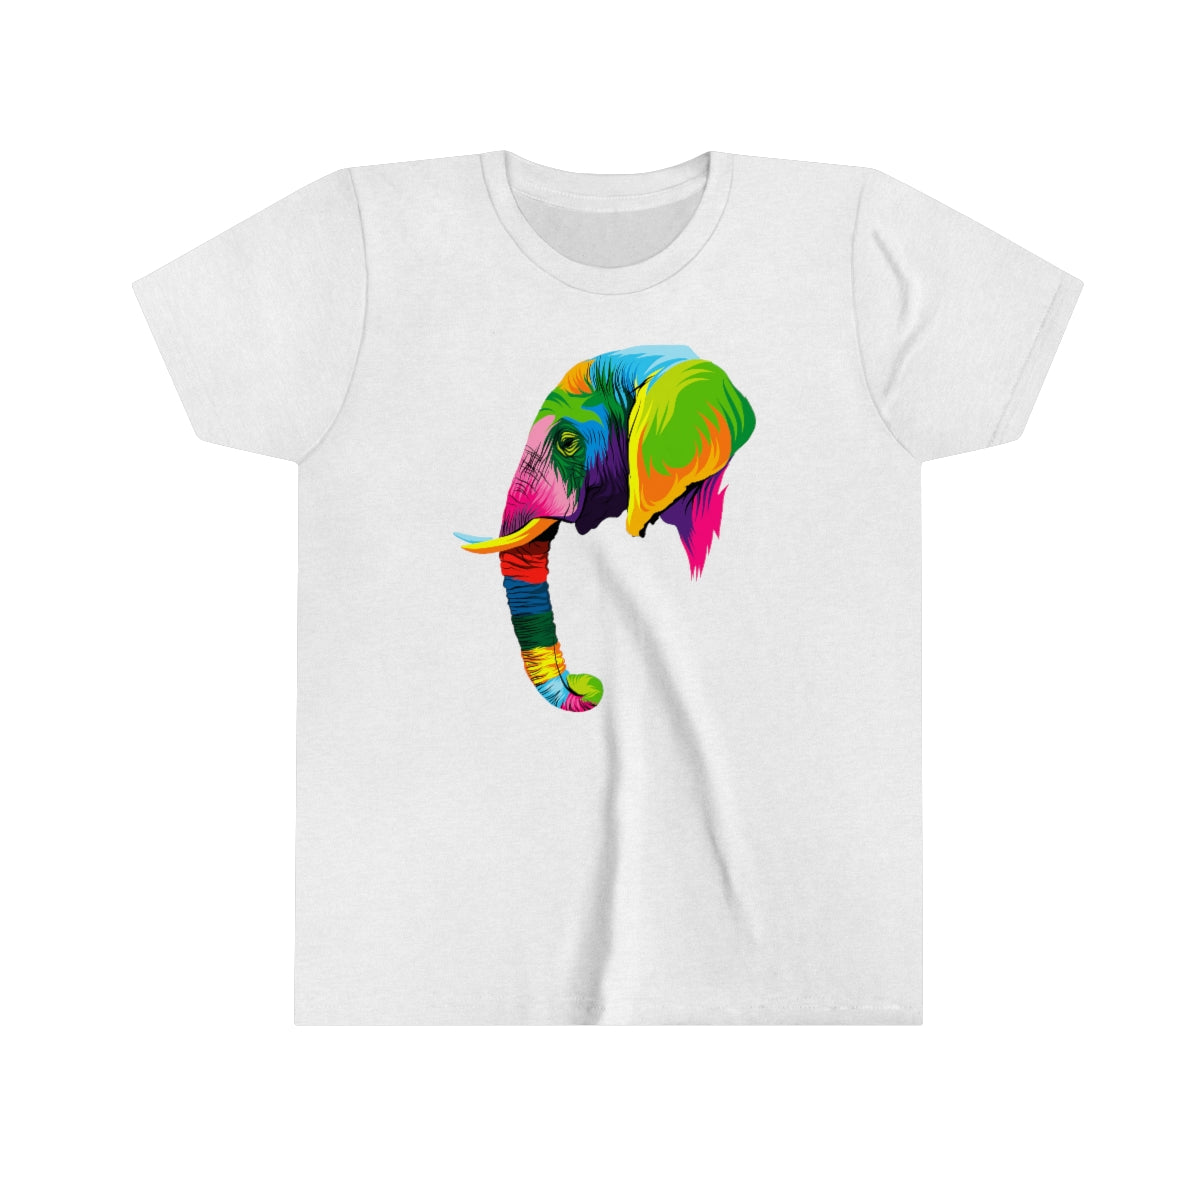 Youth Short Sleeve Tee "Abstract colorful elephant"